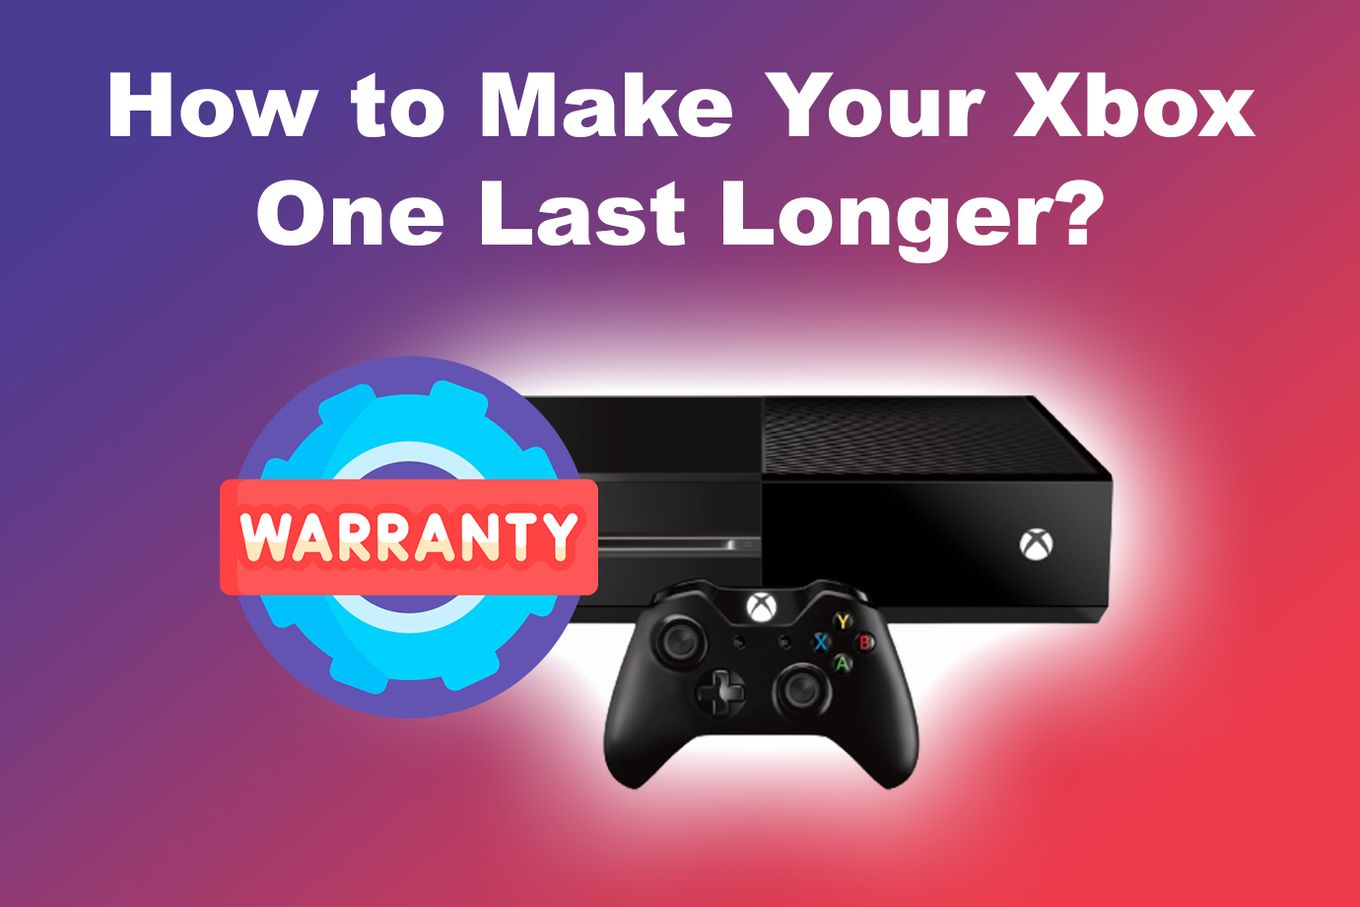 How Long Does Xbox One Warranty Last?